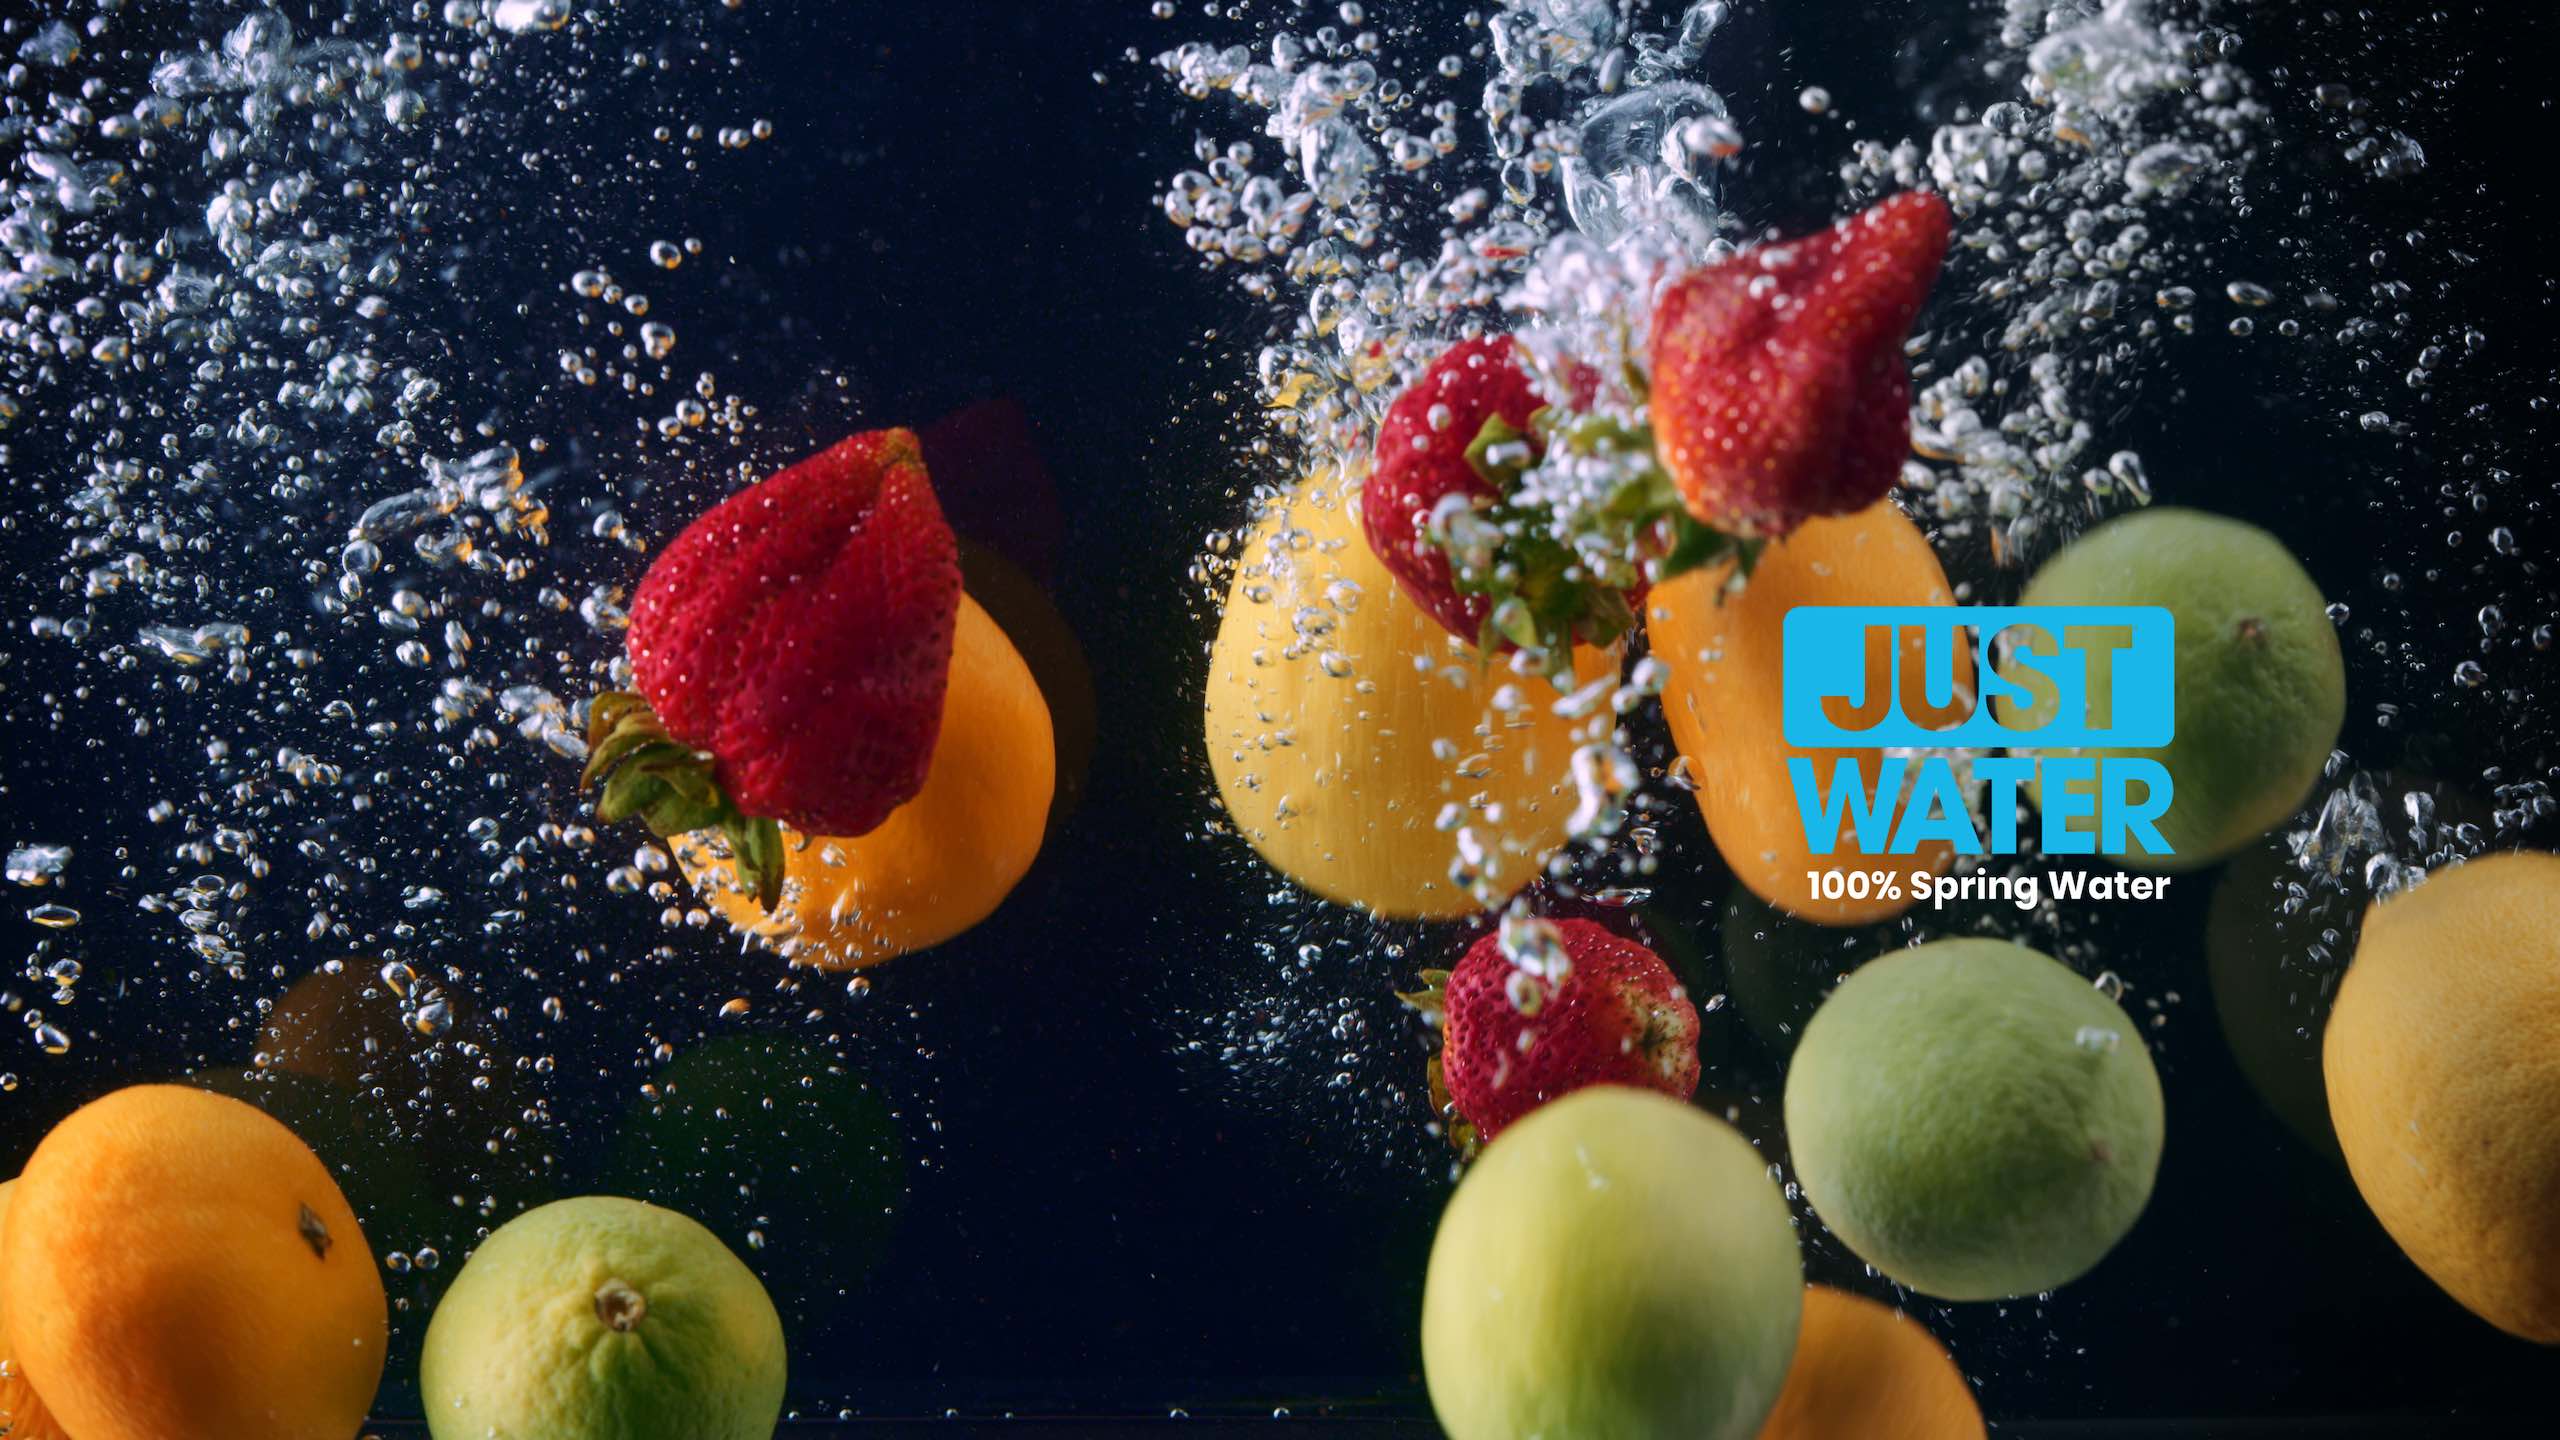 Just water video ad Tangerines, strawberries and limes under water with bubbles. There is also a light blue and white logo